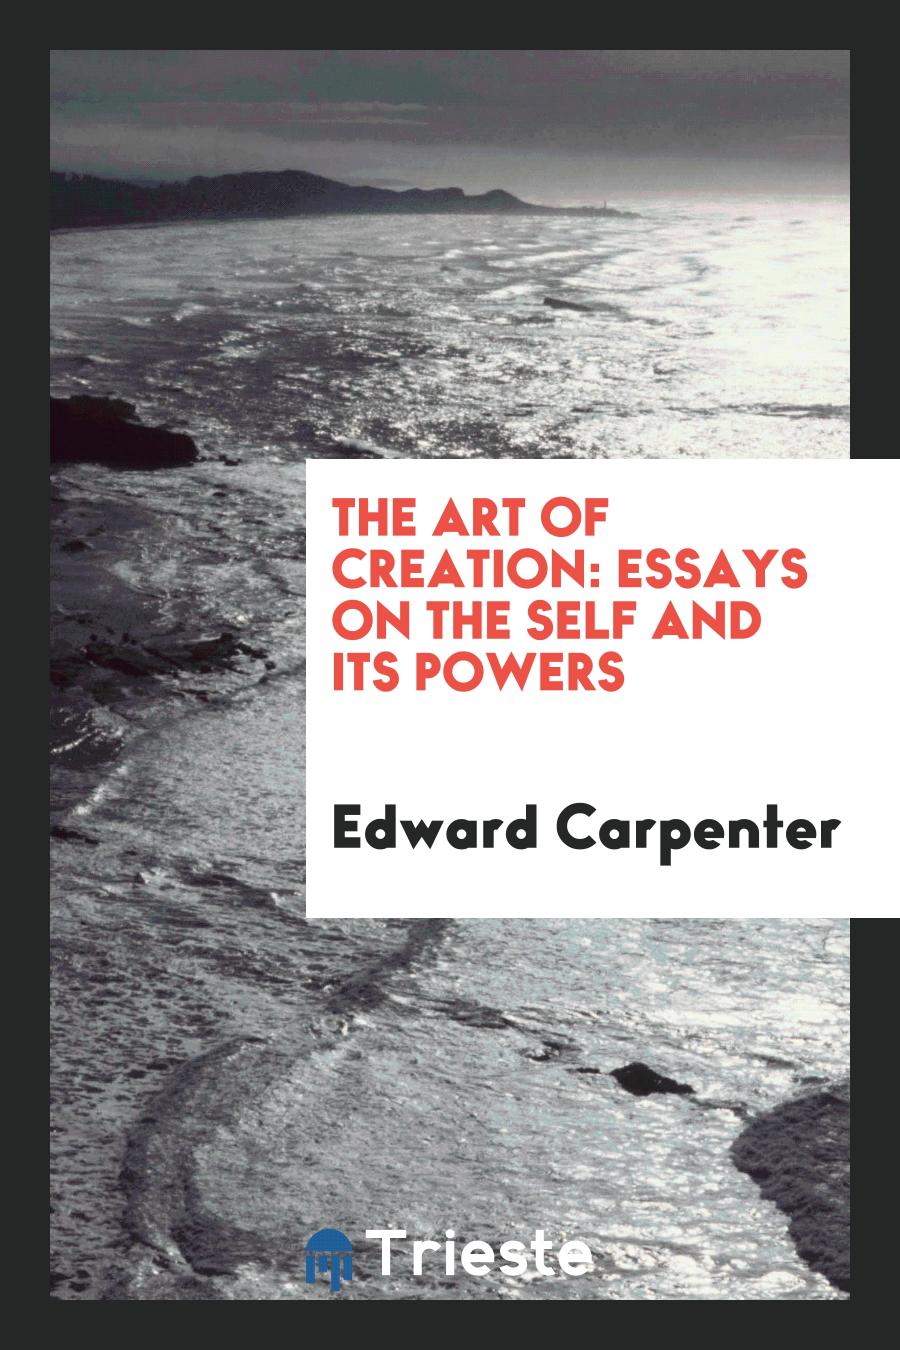 Edward Carpenter - The Art of Creation: Essays on the Self and Its Powers